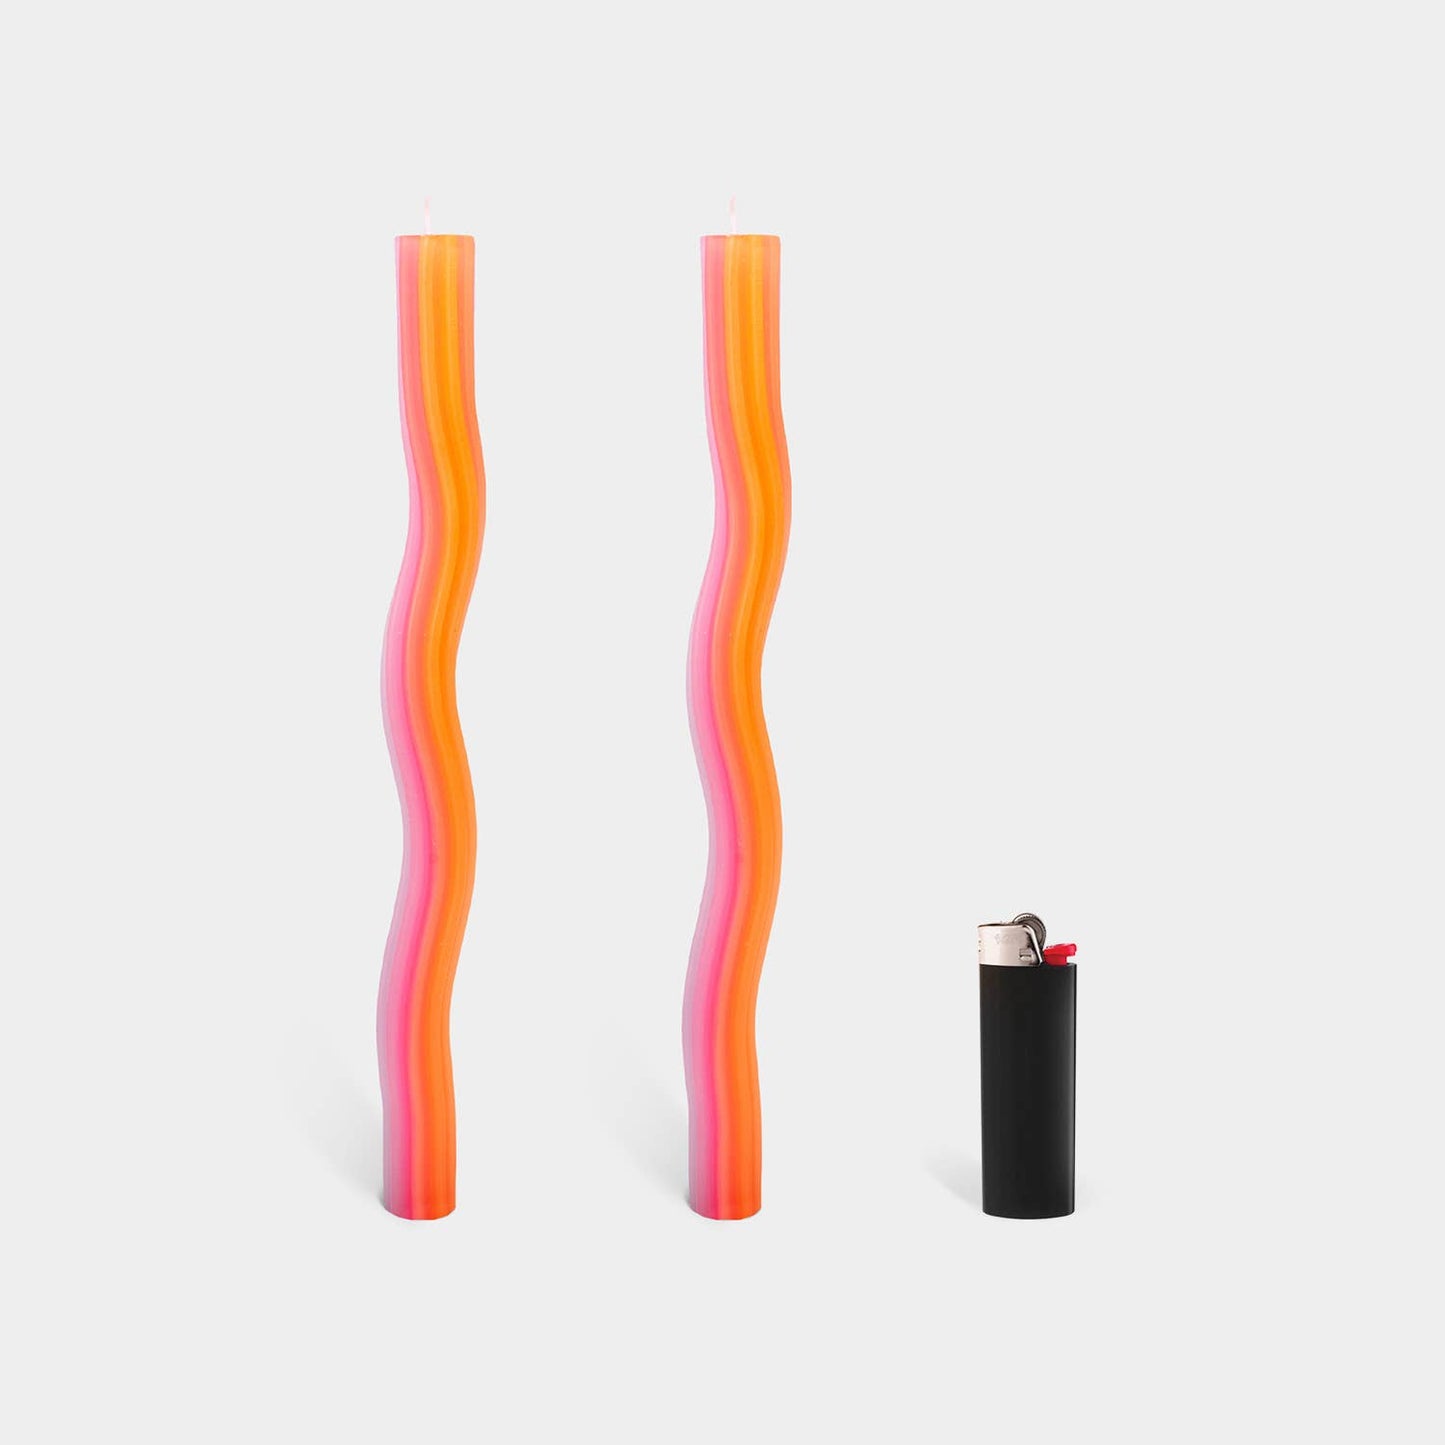 Wiggle Candles in Orange